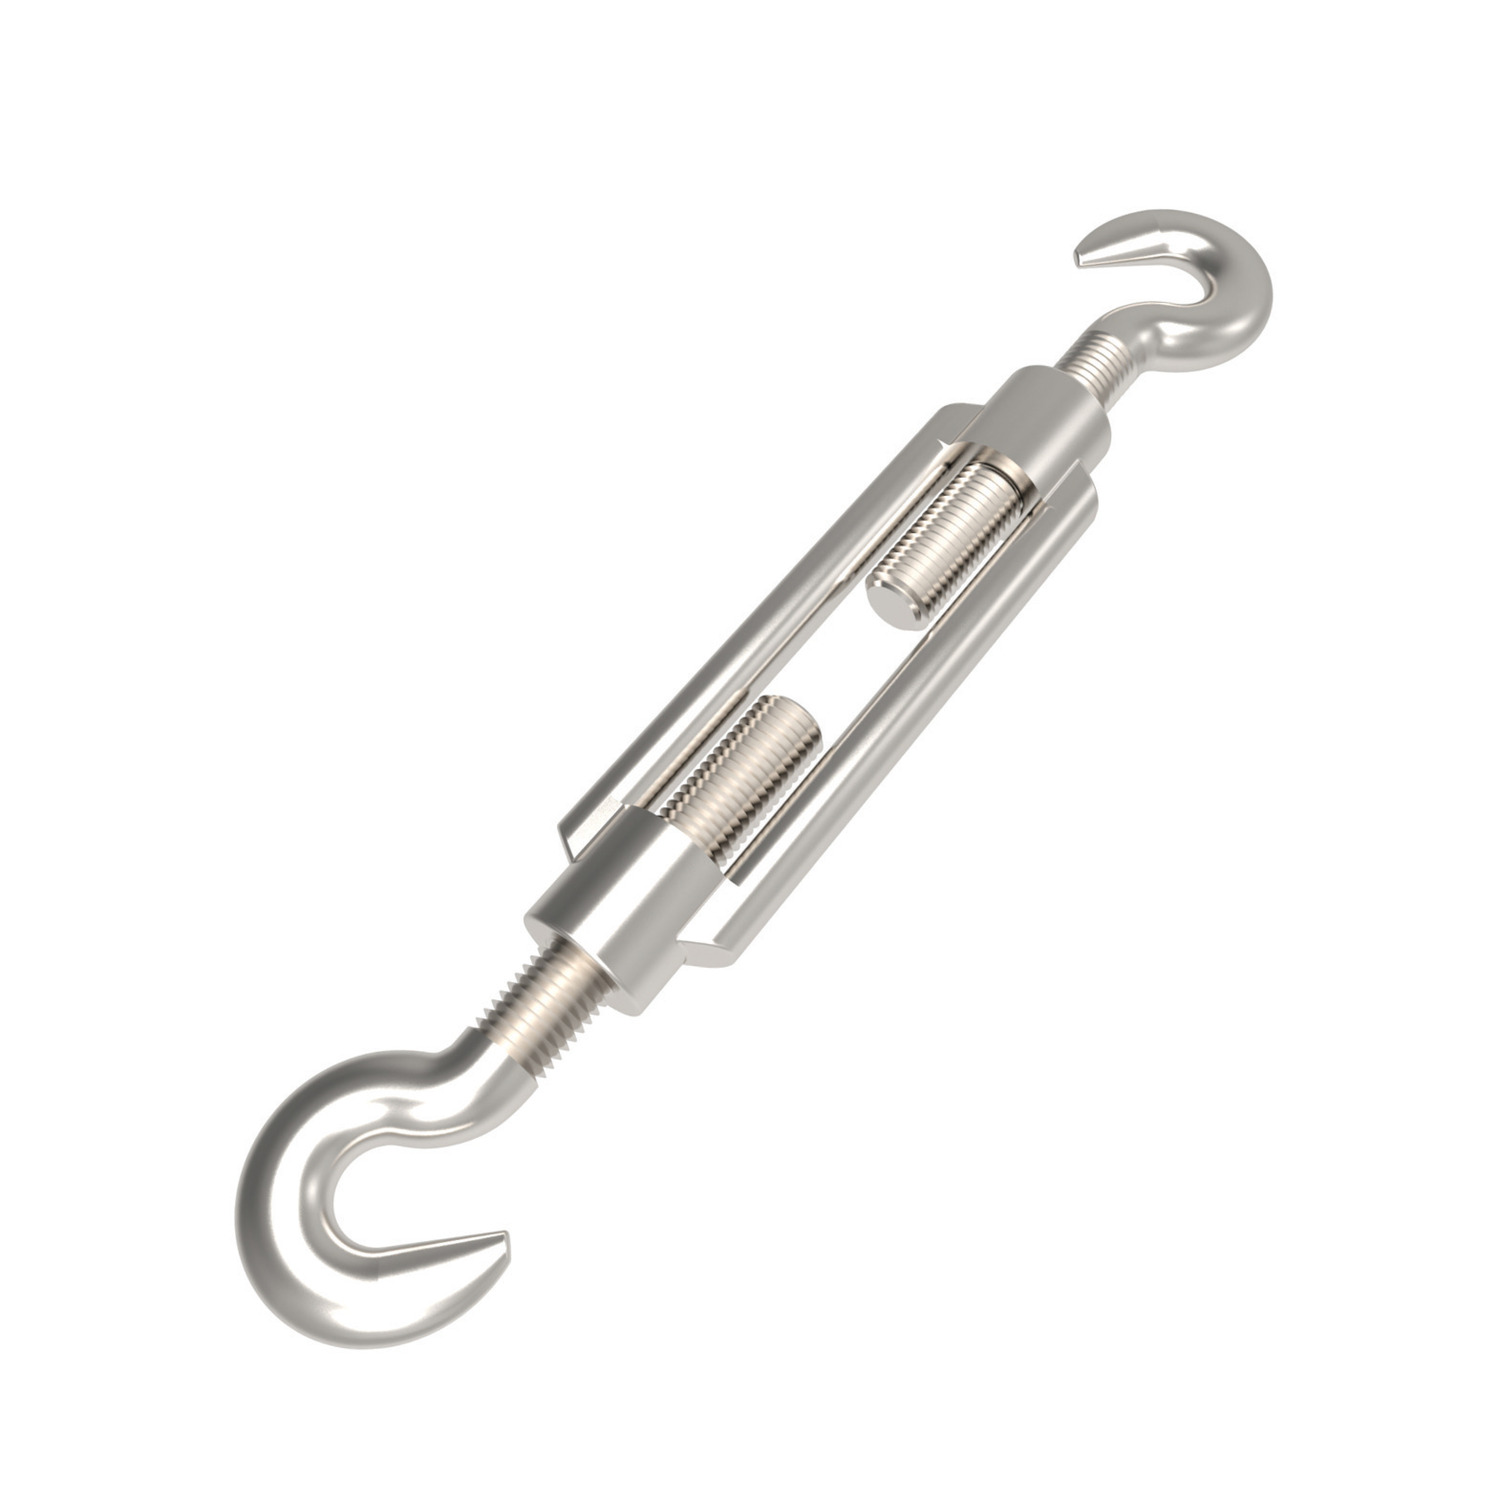 Product R3846, Hook End Turnbuckles stainless steel / 